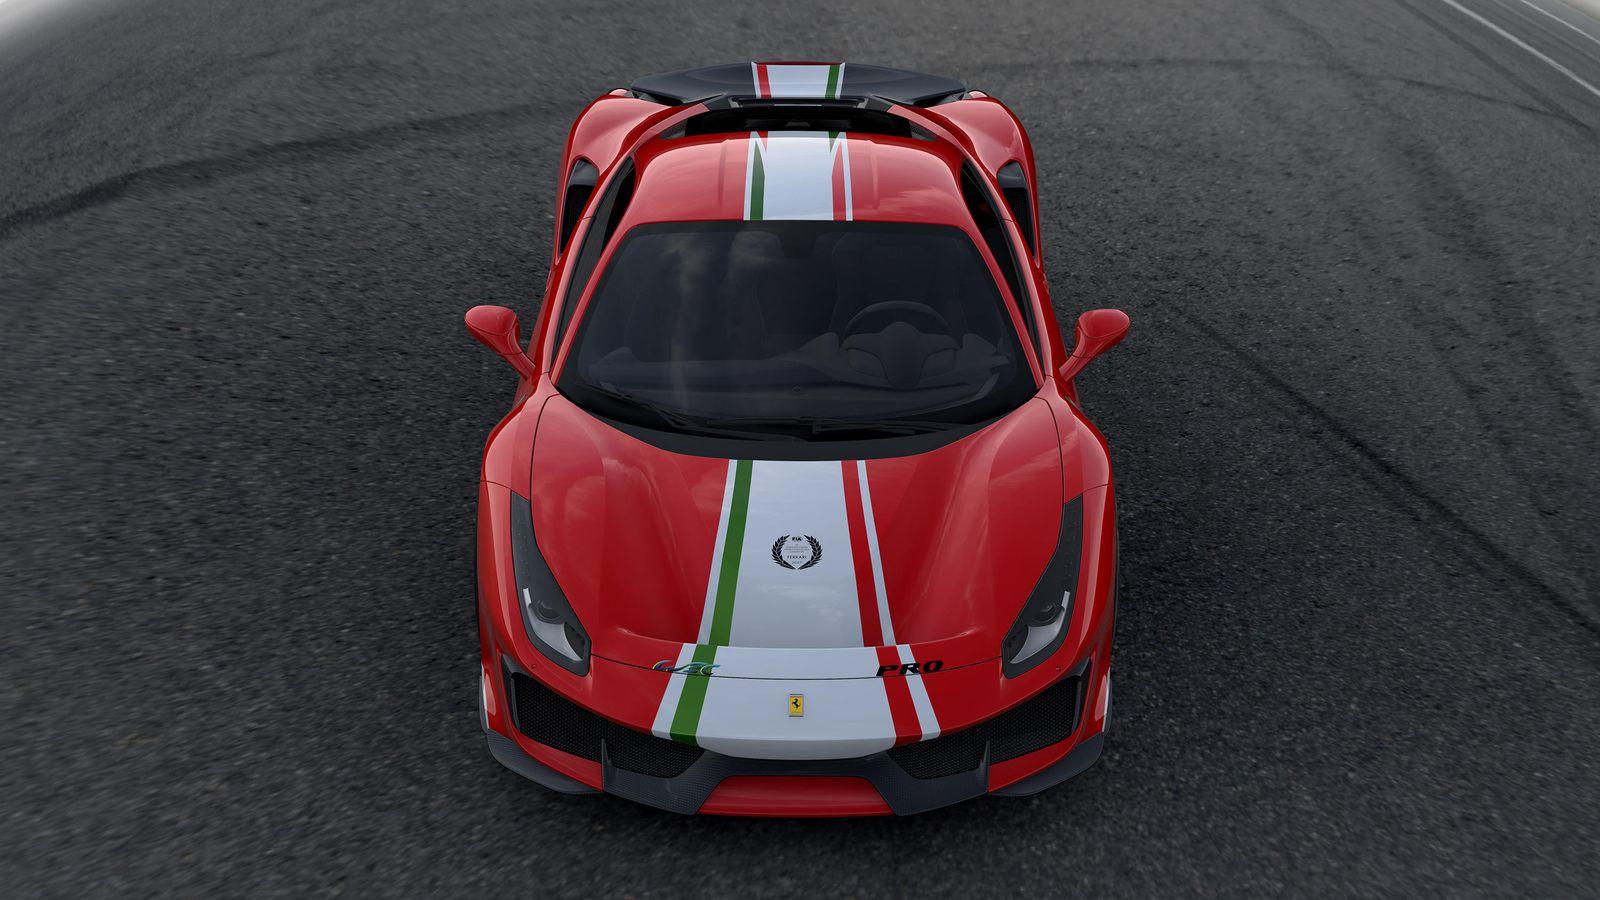 Ferrari's 488 Pista special edition is for racecar drivers only